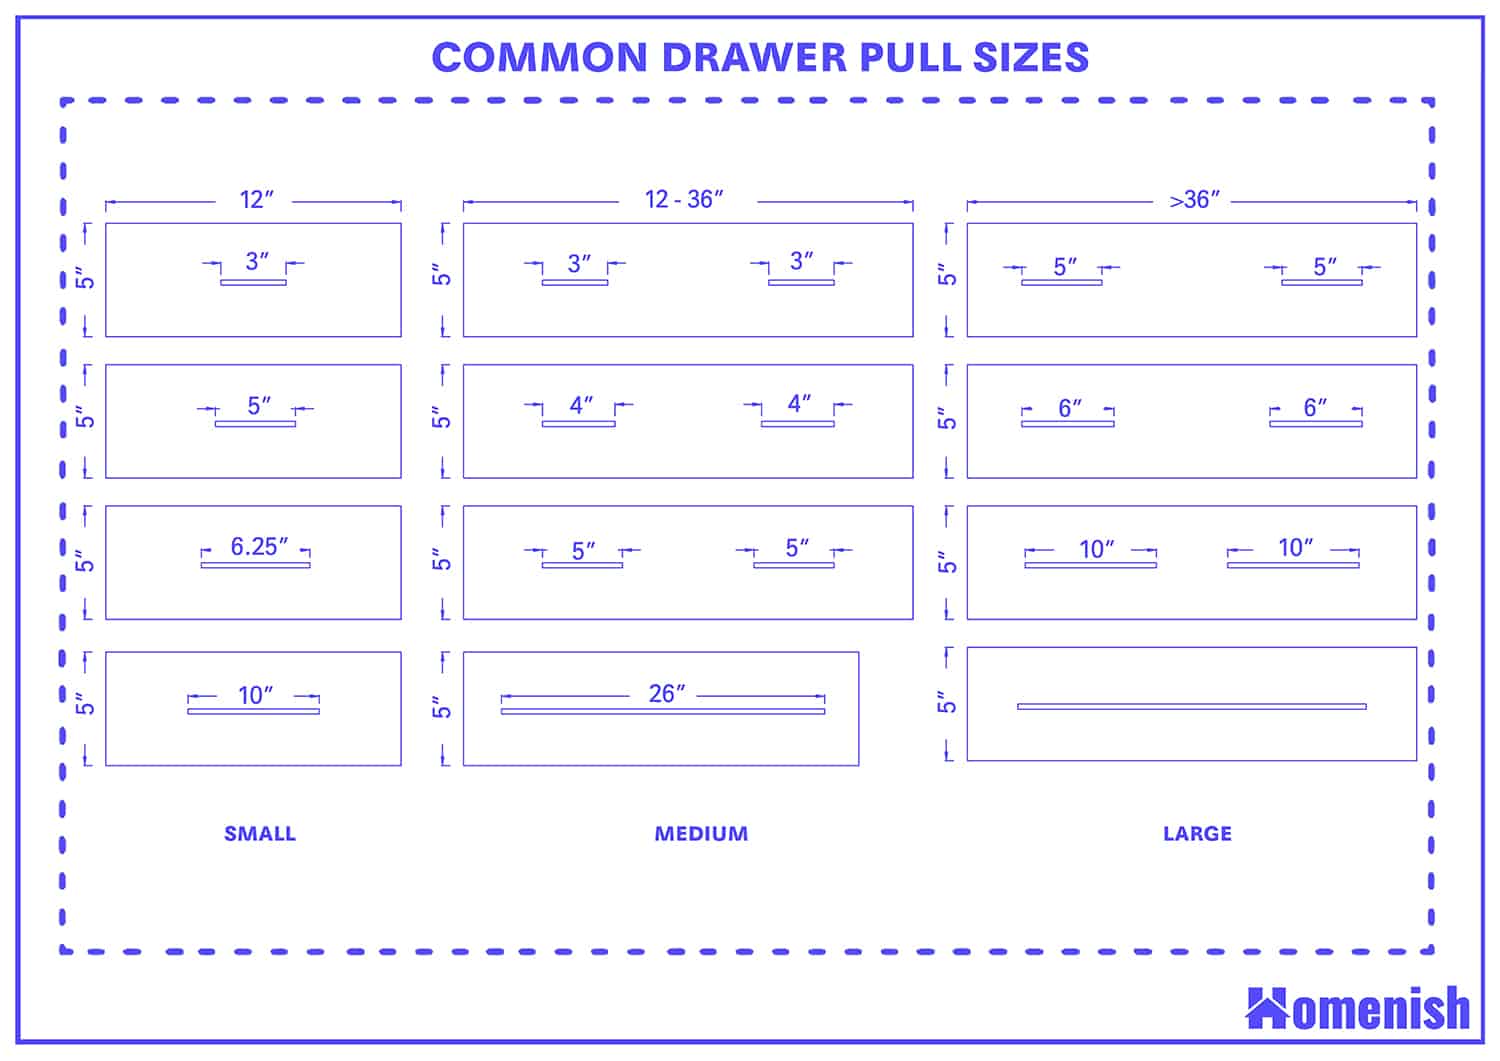 Common drawer pull sizes